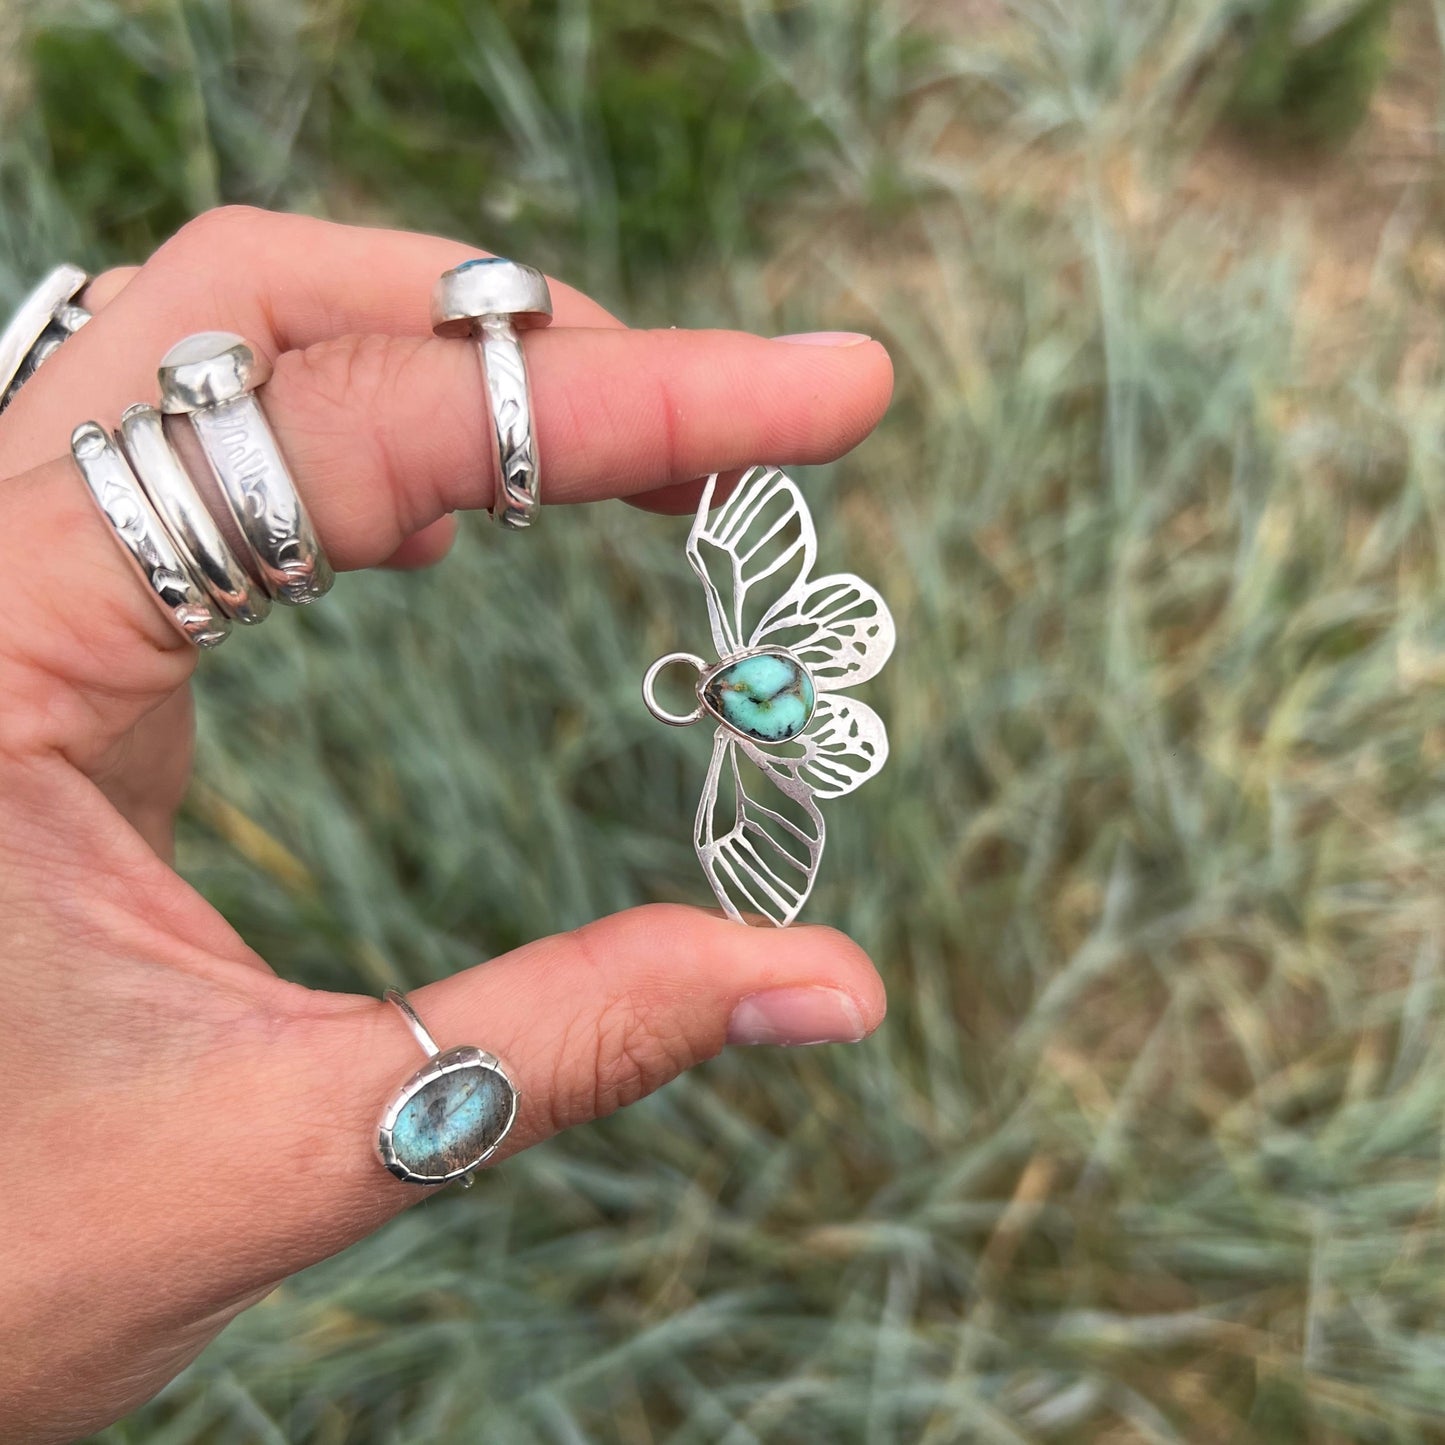 "Butterfly" necklace